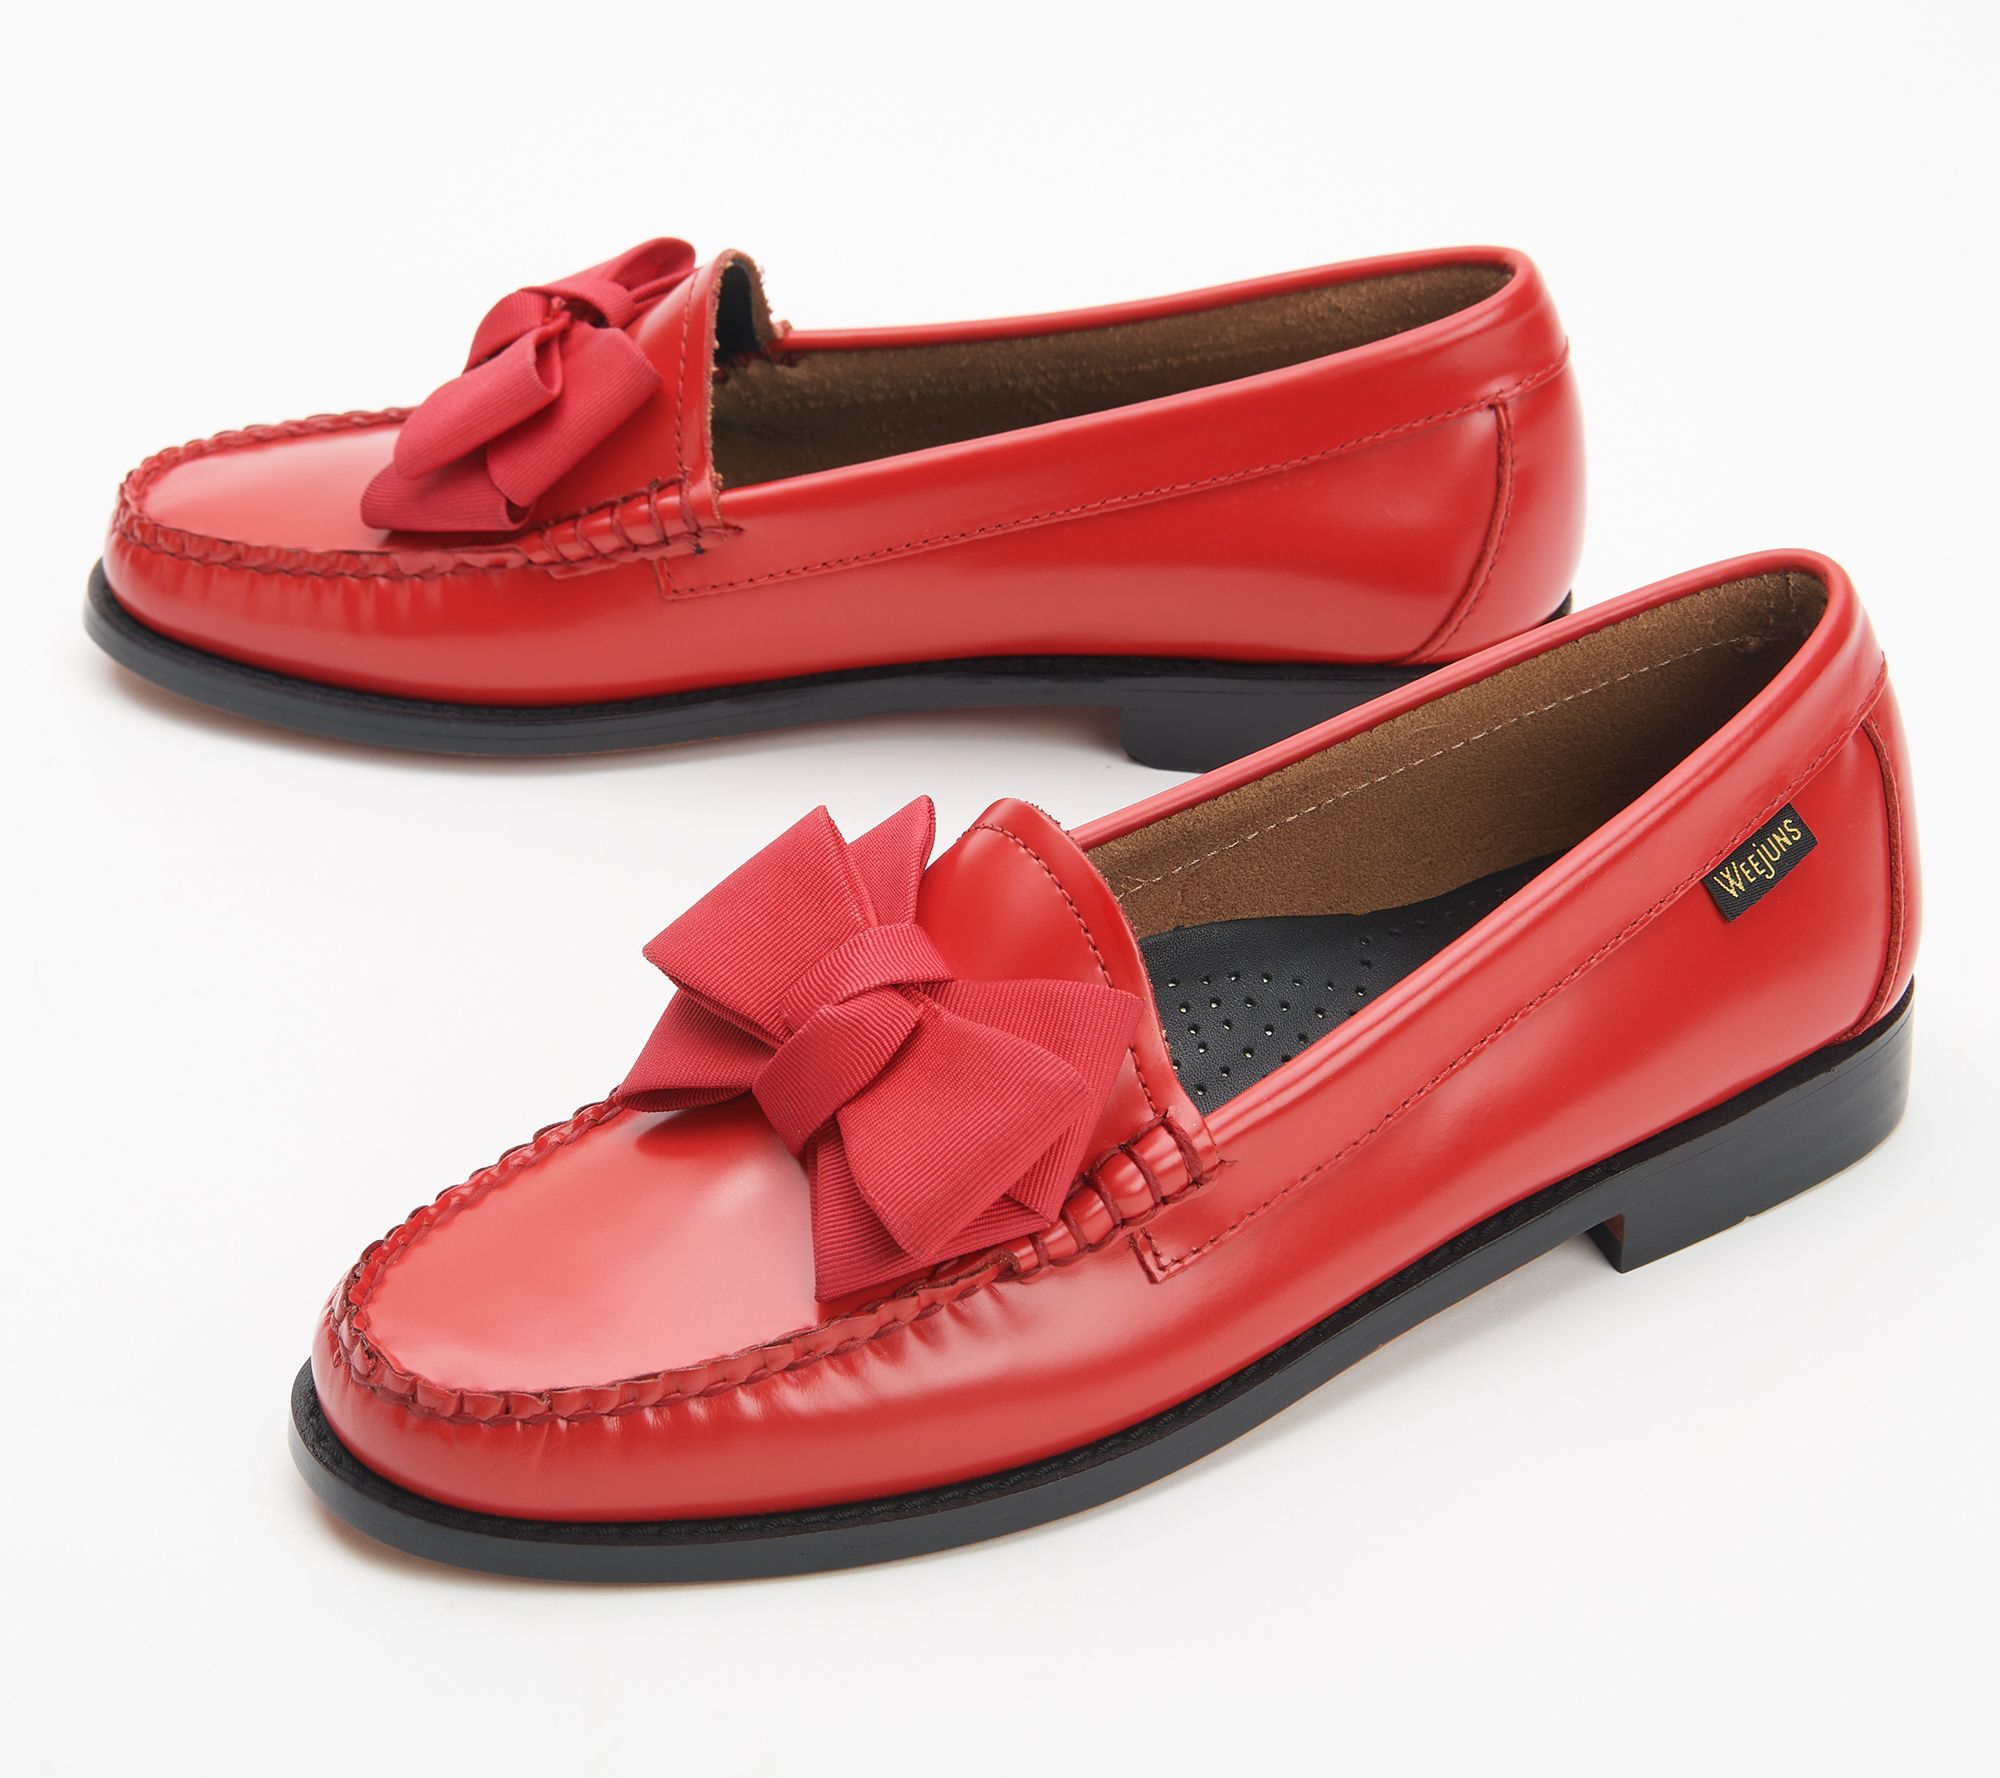 G.H. Bass Originals Weejuns Penny Loafers - Lillian Bow - QVC.com